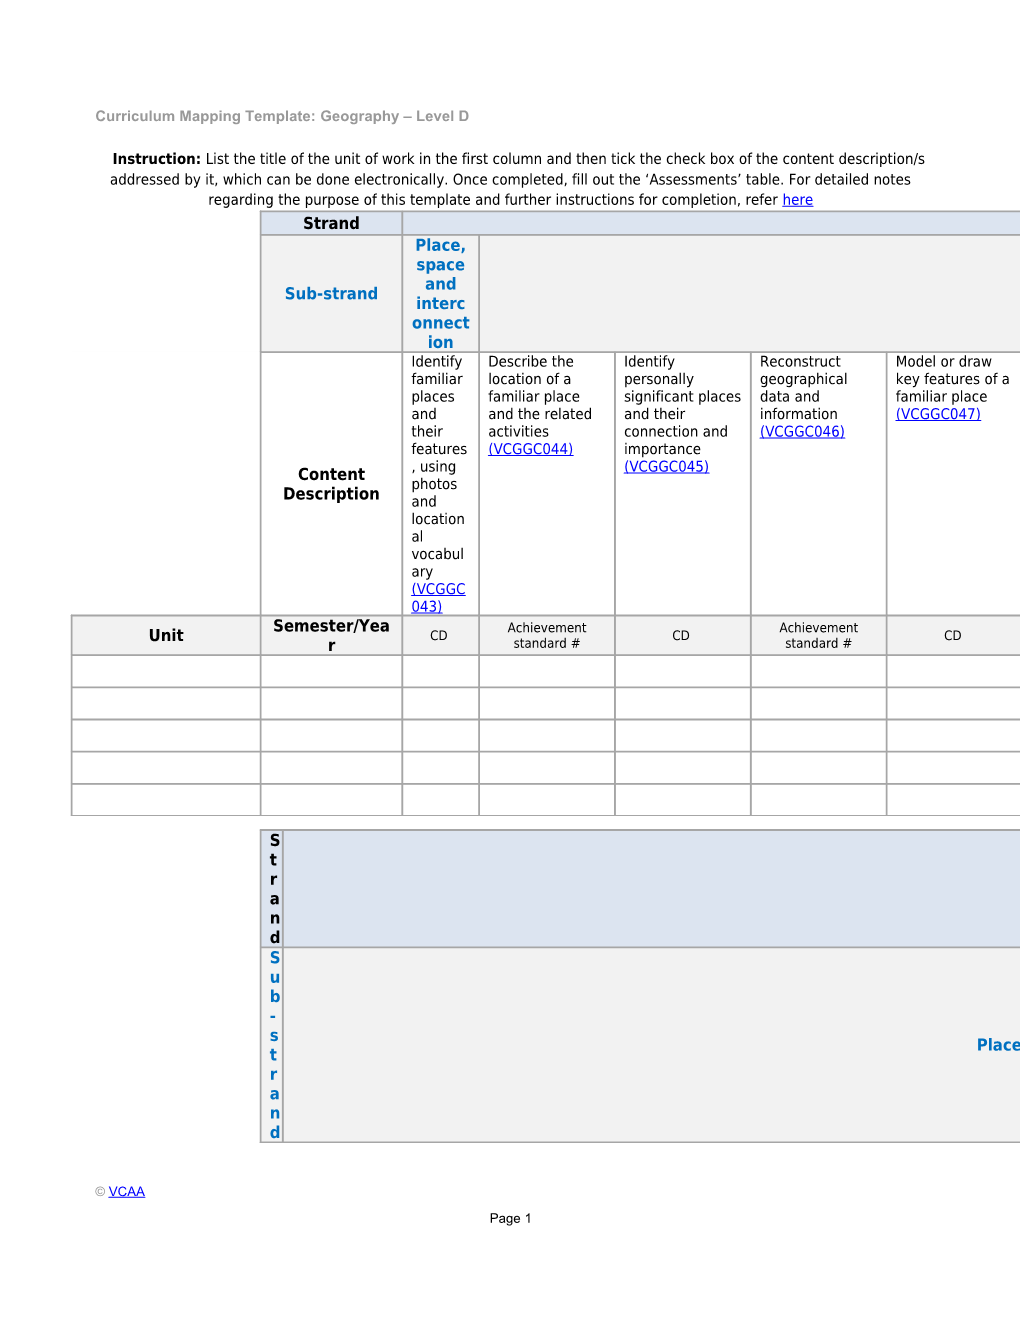 Curriculum Mapping Template: Geography Level D